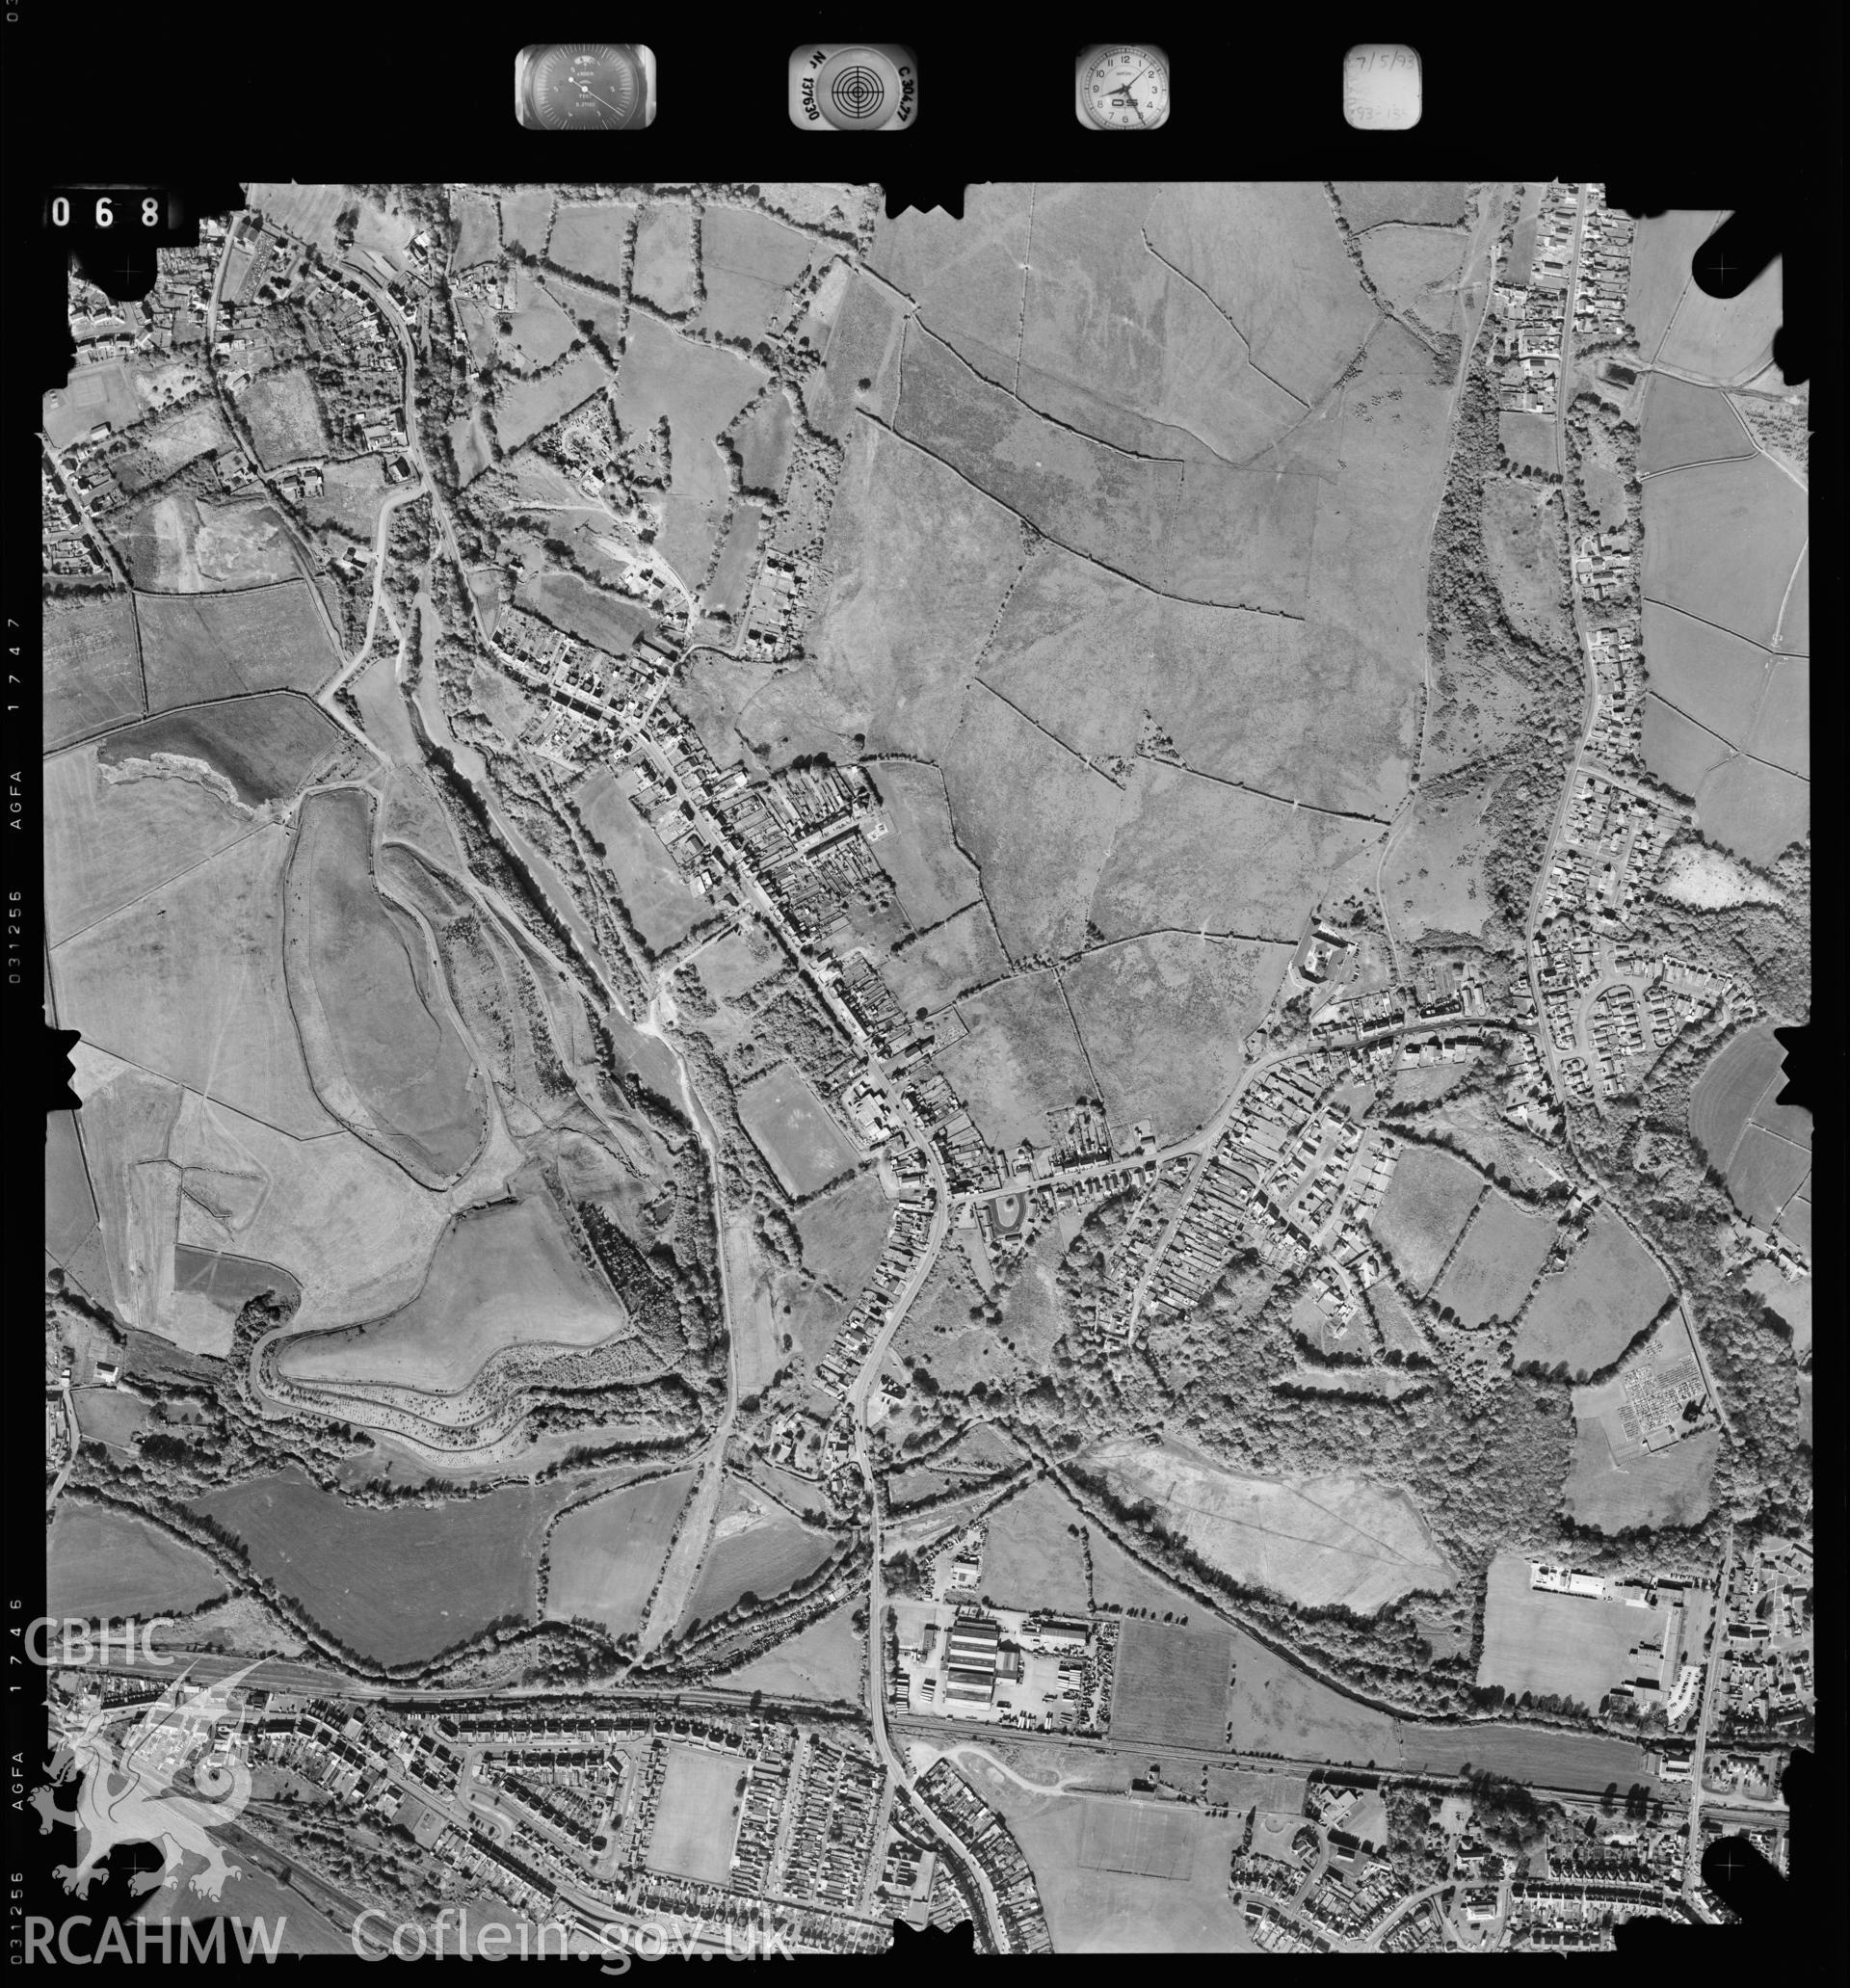 Digitized copy of an aerial photograph showing the Ammanford area, taken by Ordnance Survey, 1993.